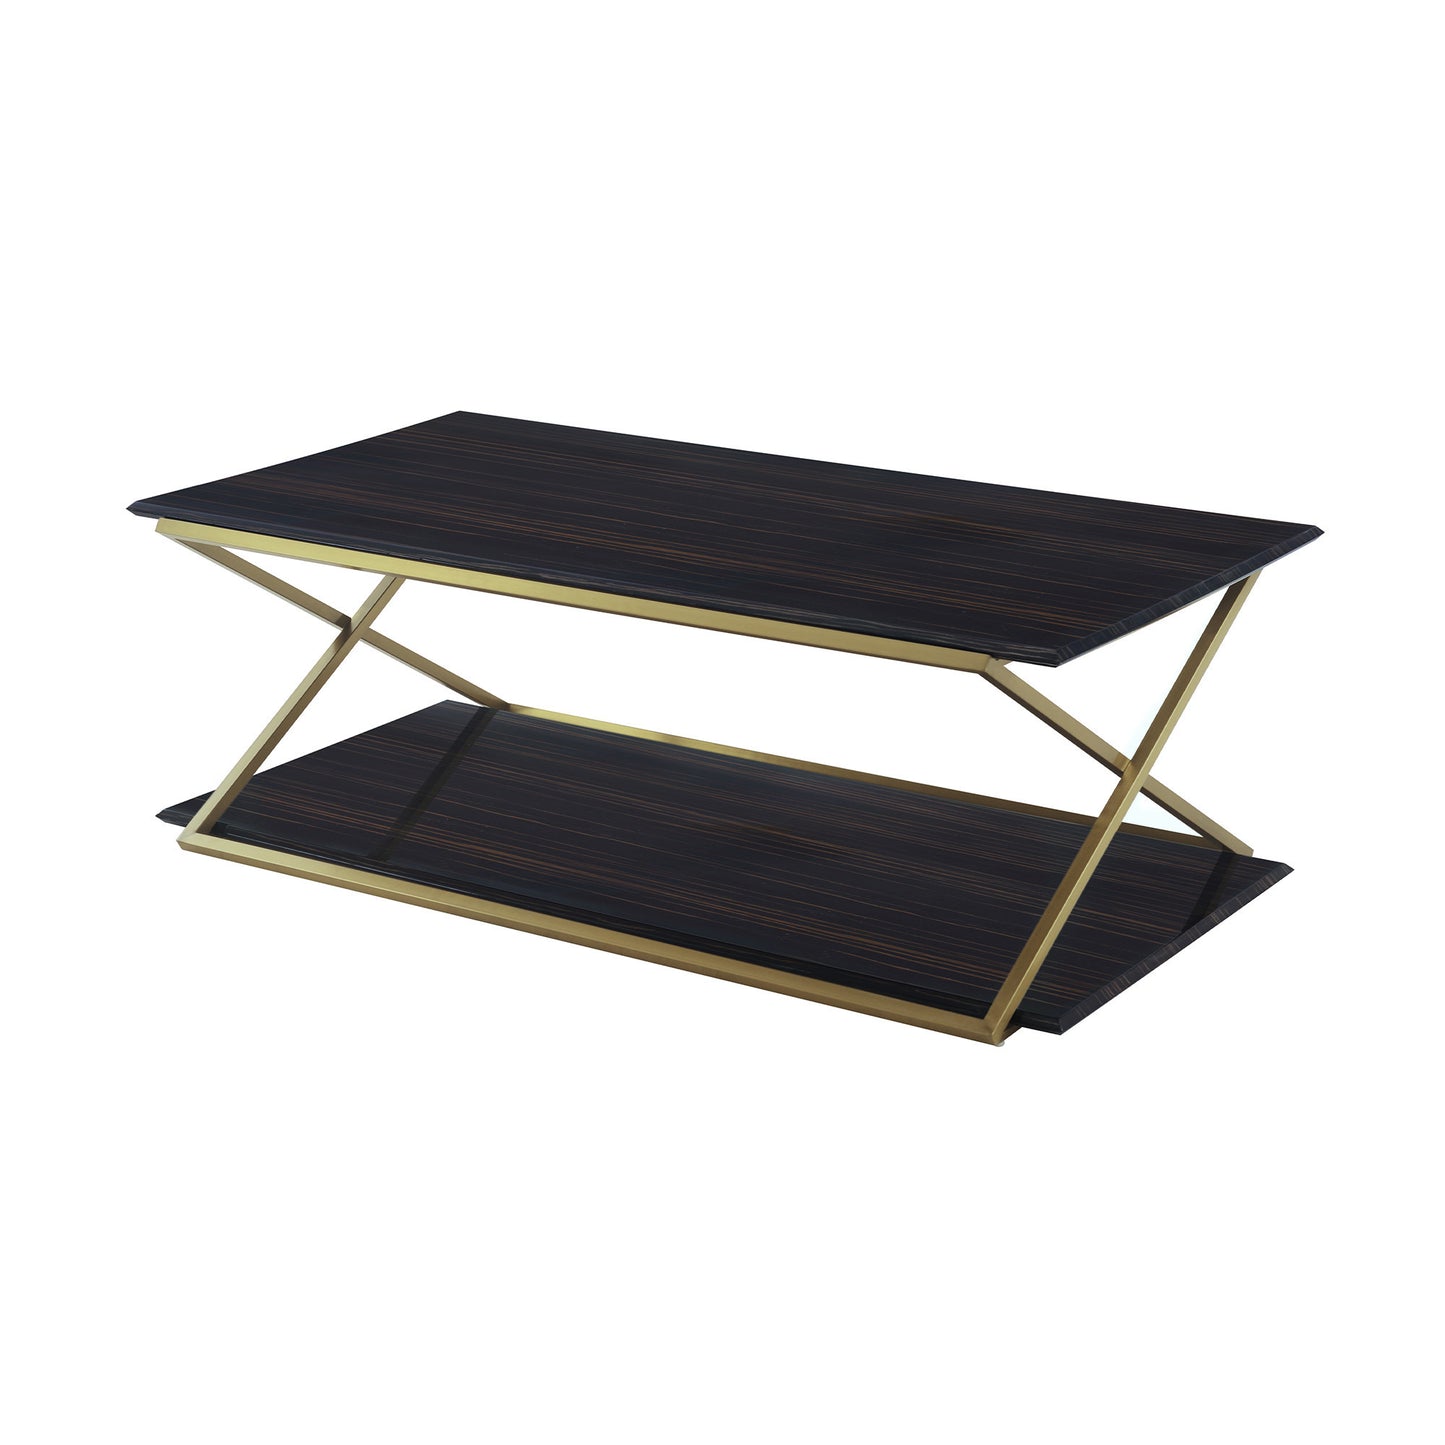 51" Dark Brown And Gold Rectangular Coffee Table With Shelf By Homeroots